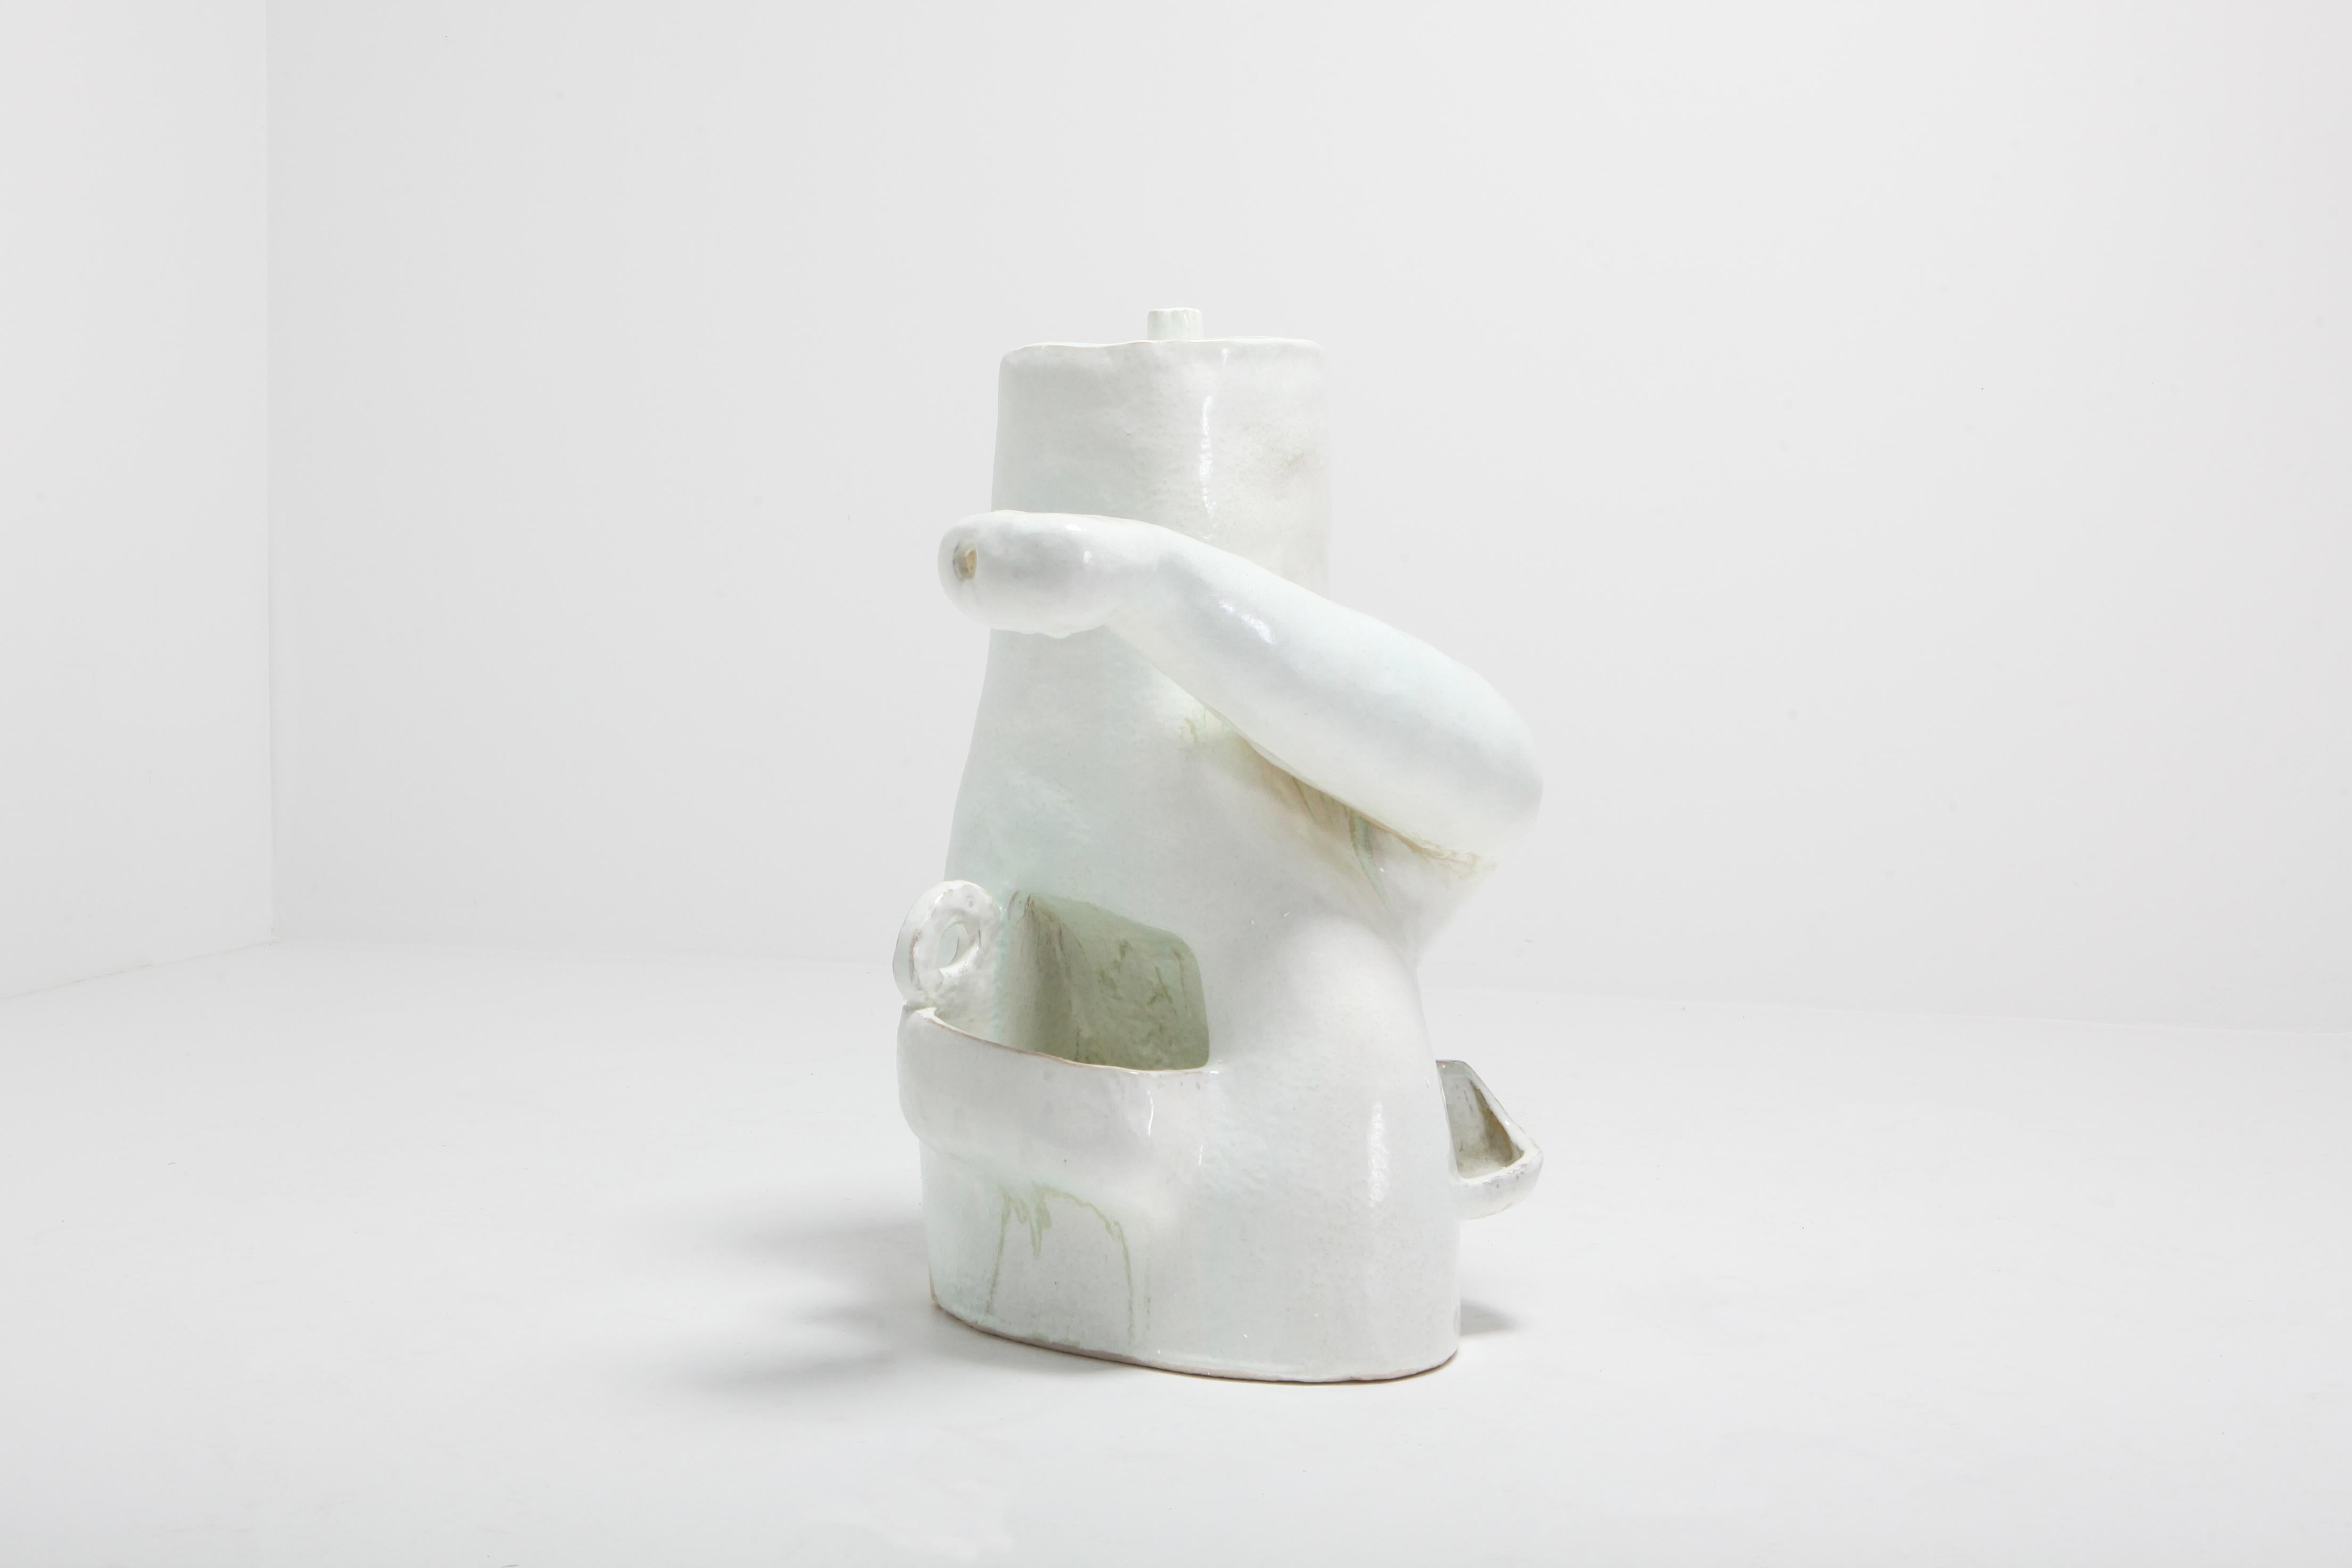 Functional art or Collectible design bedside sculpture by Carlo Lorenzetti, 2019.
currently on view at Everyday Gallery's In Real Life exhibition.

The Bedside series is an attempt at bespoke ceramics that begins with the question: What do you